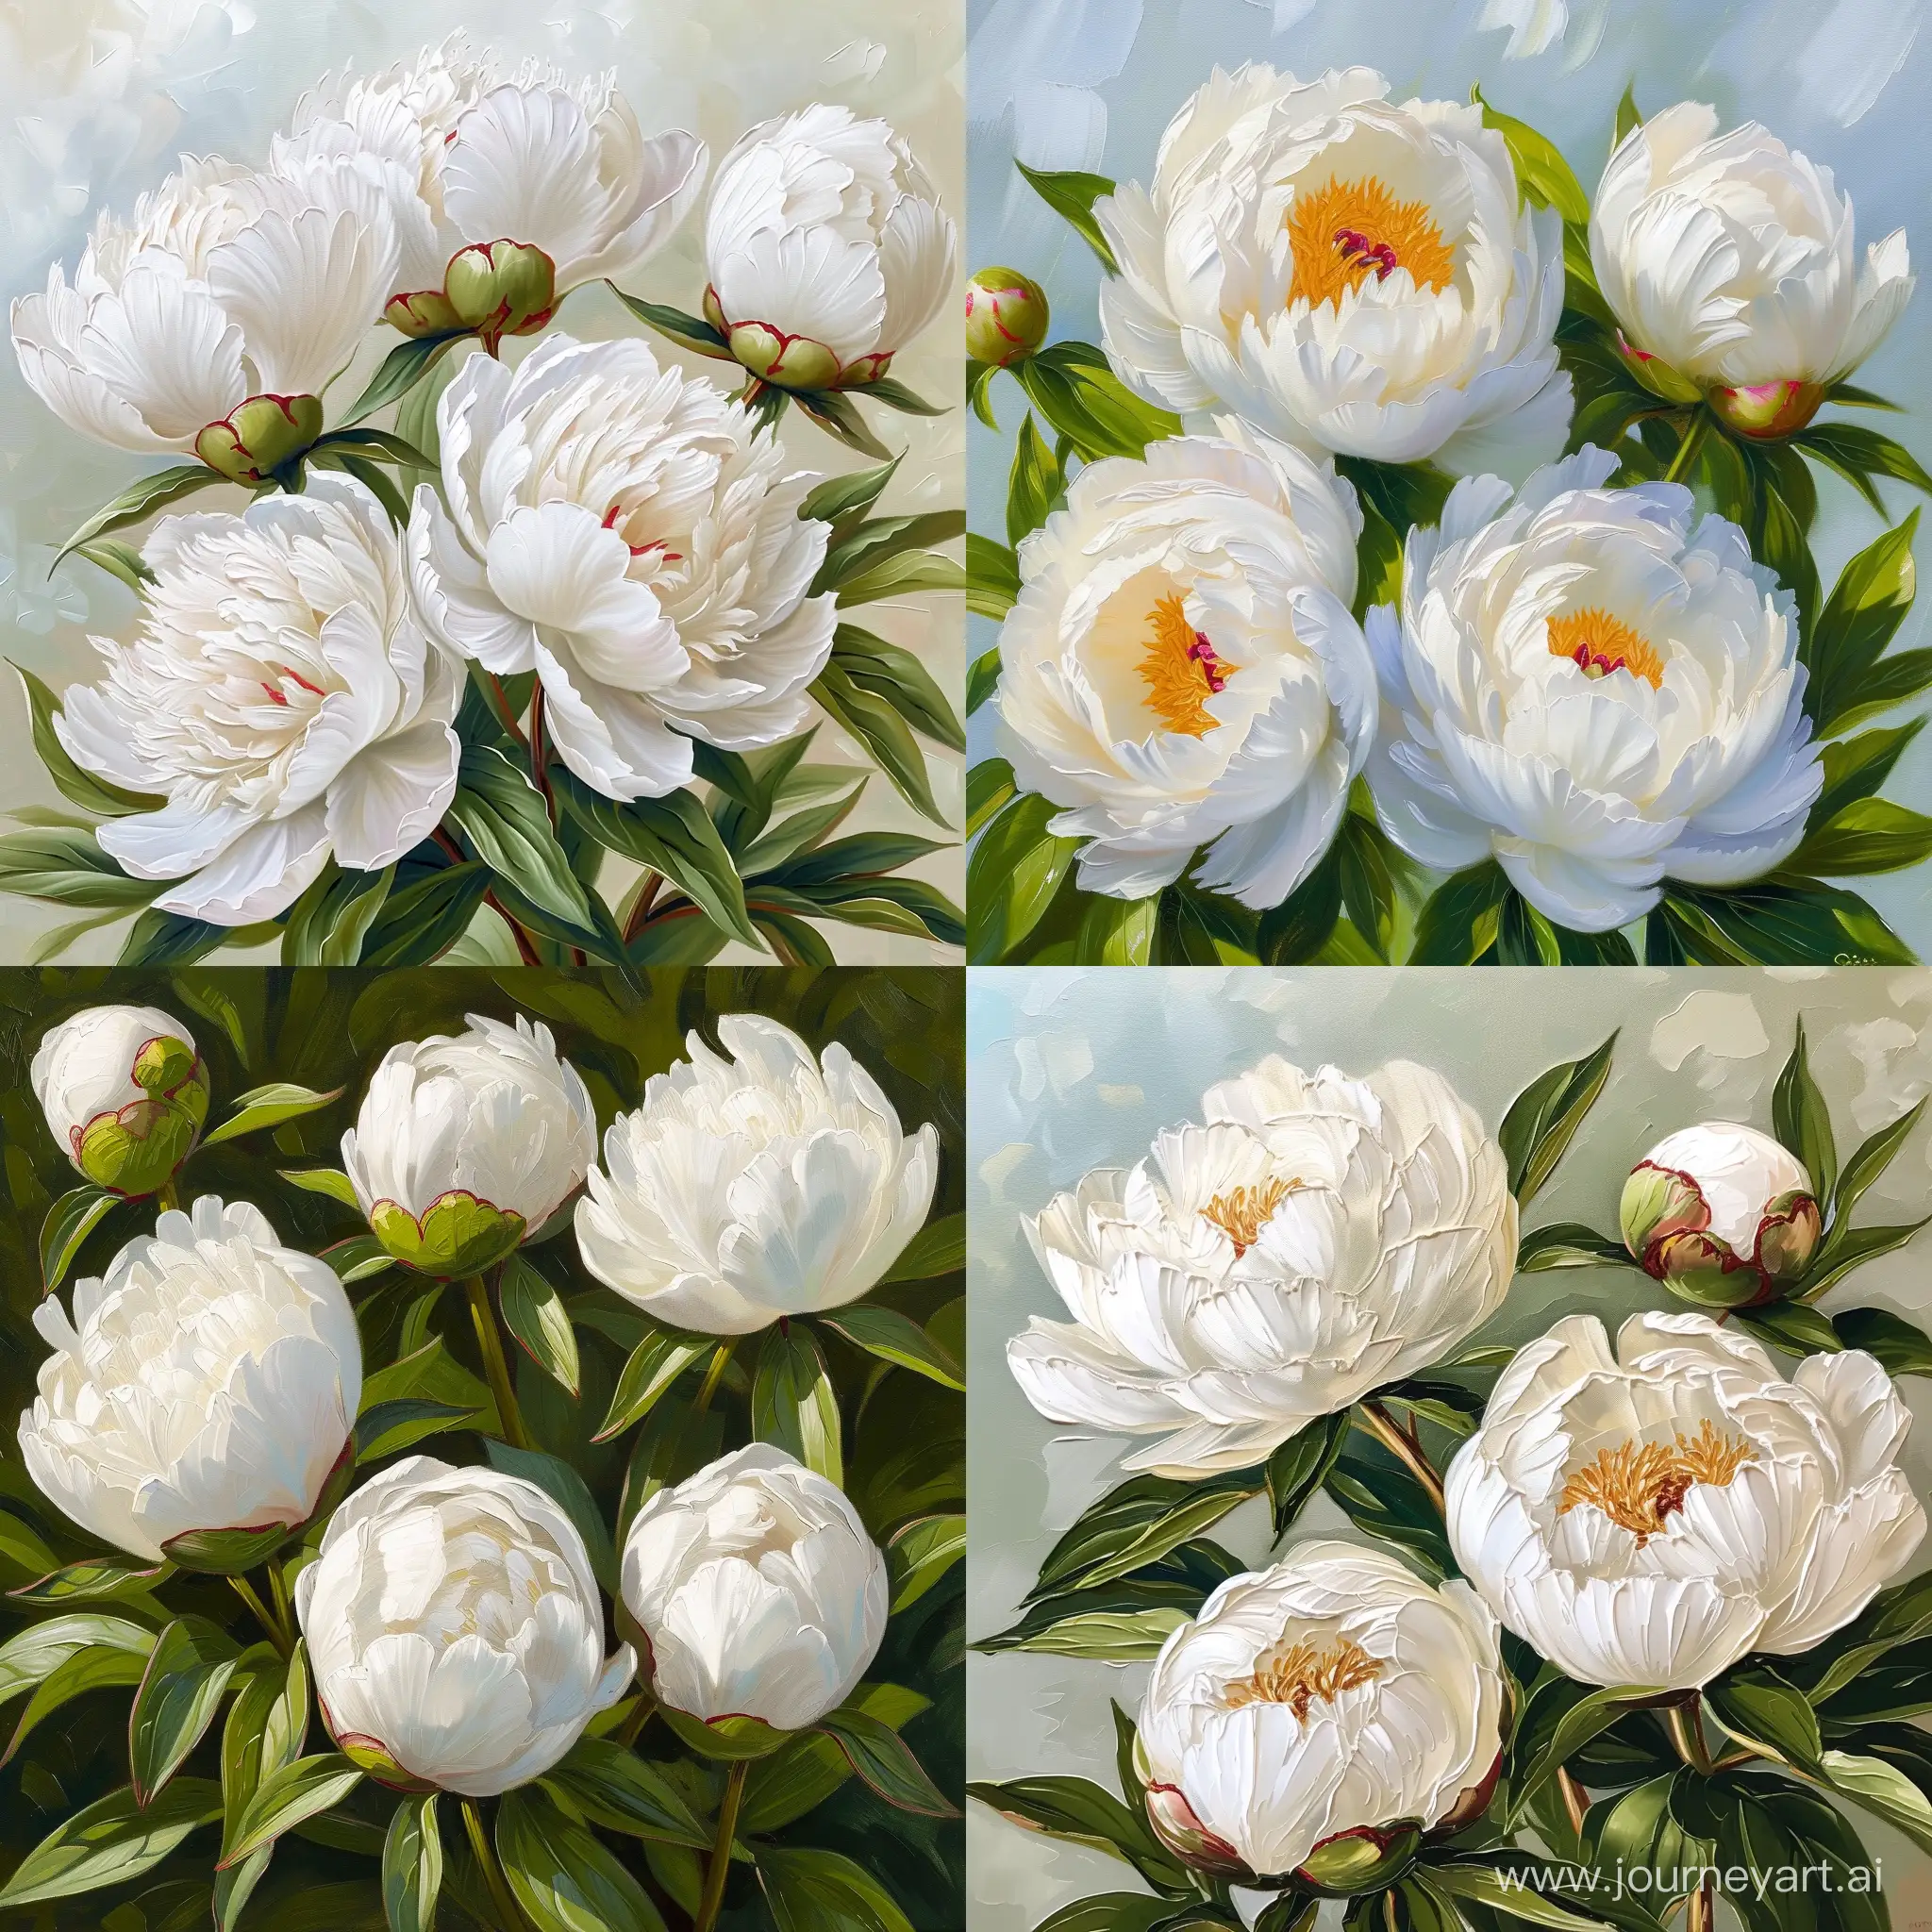 Elegant-Oil-Painting-of-Five-White-Peony-Flowers-with-Green-Leaves